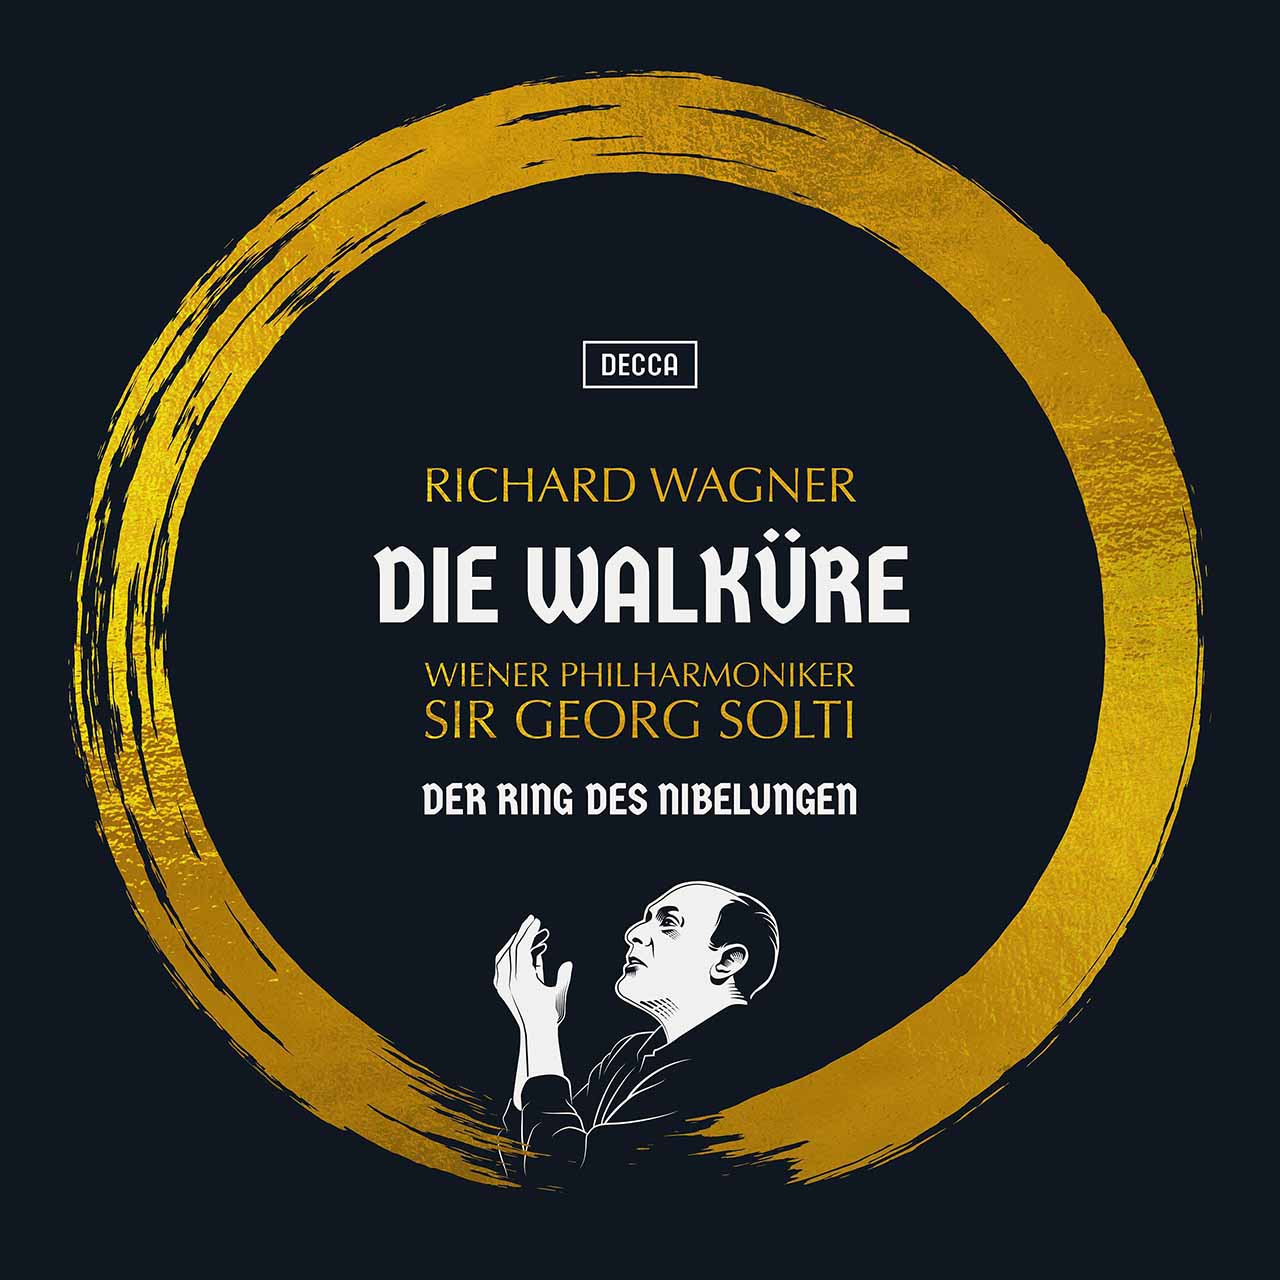 GÖTTERDÄMMERUNG 10TH AUG | BAYREUTH FESTIVAL TICKET | Richard Wagner Ring  Cycle £99.00 - PicClick UK